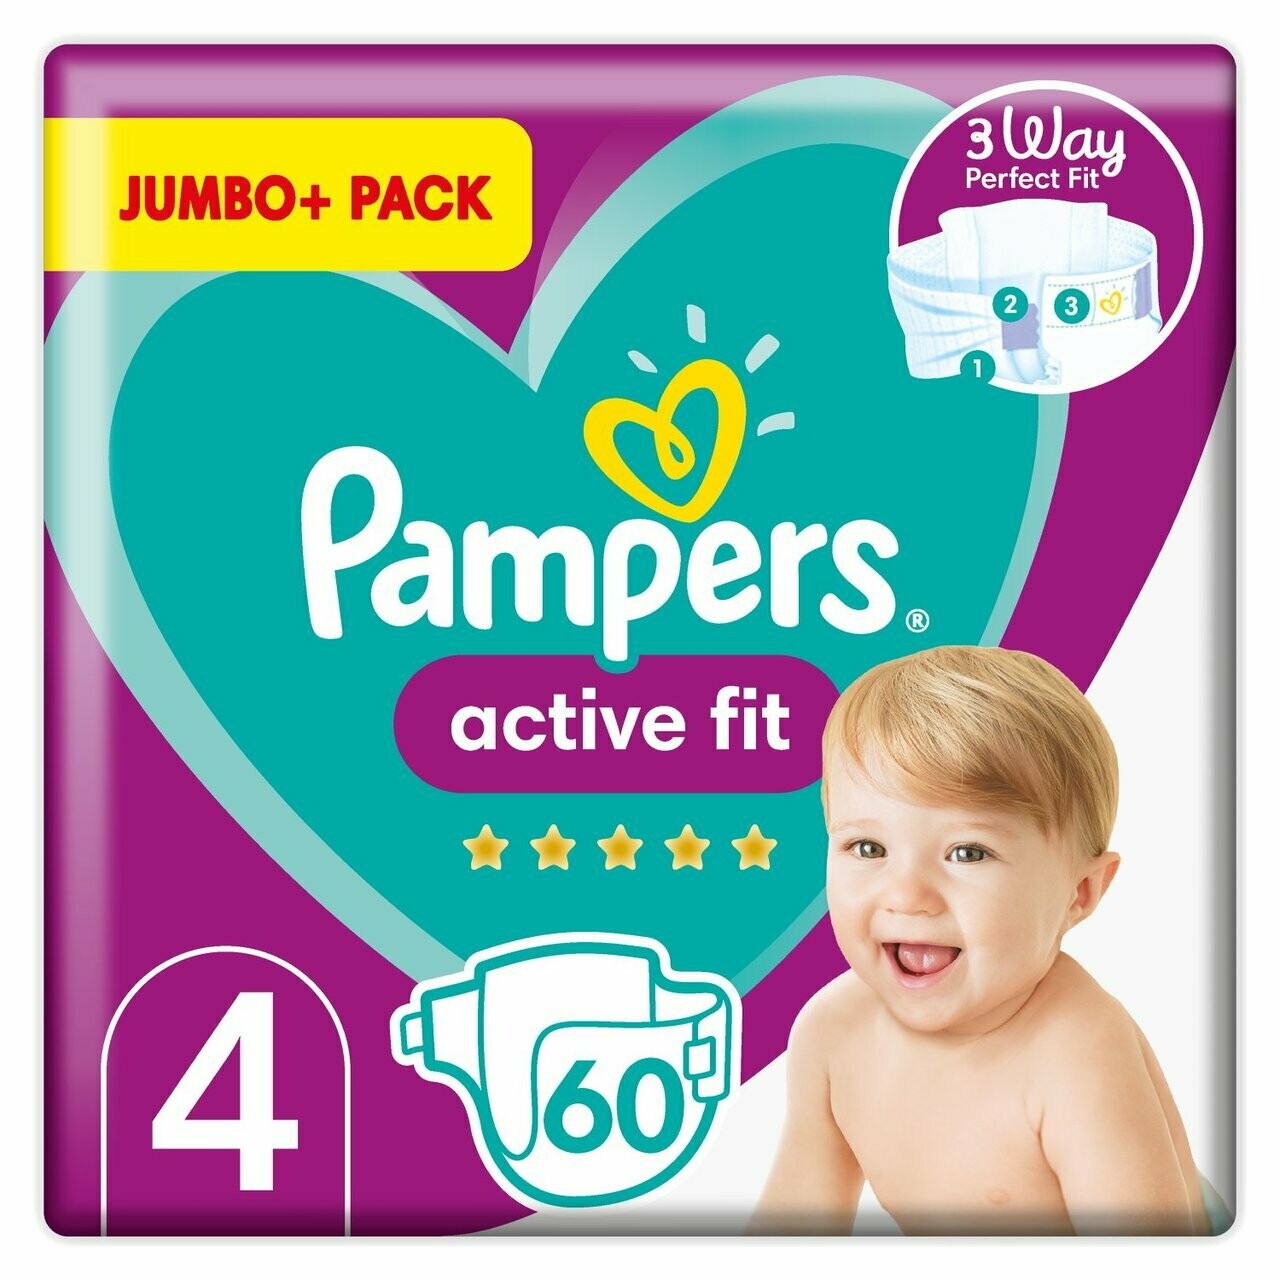 PAMPERS ACTIVE FIT SIZE 4 x120/Pack, 9-14kg JUMBO+ PACK